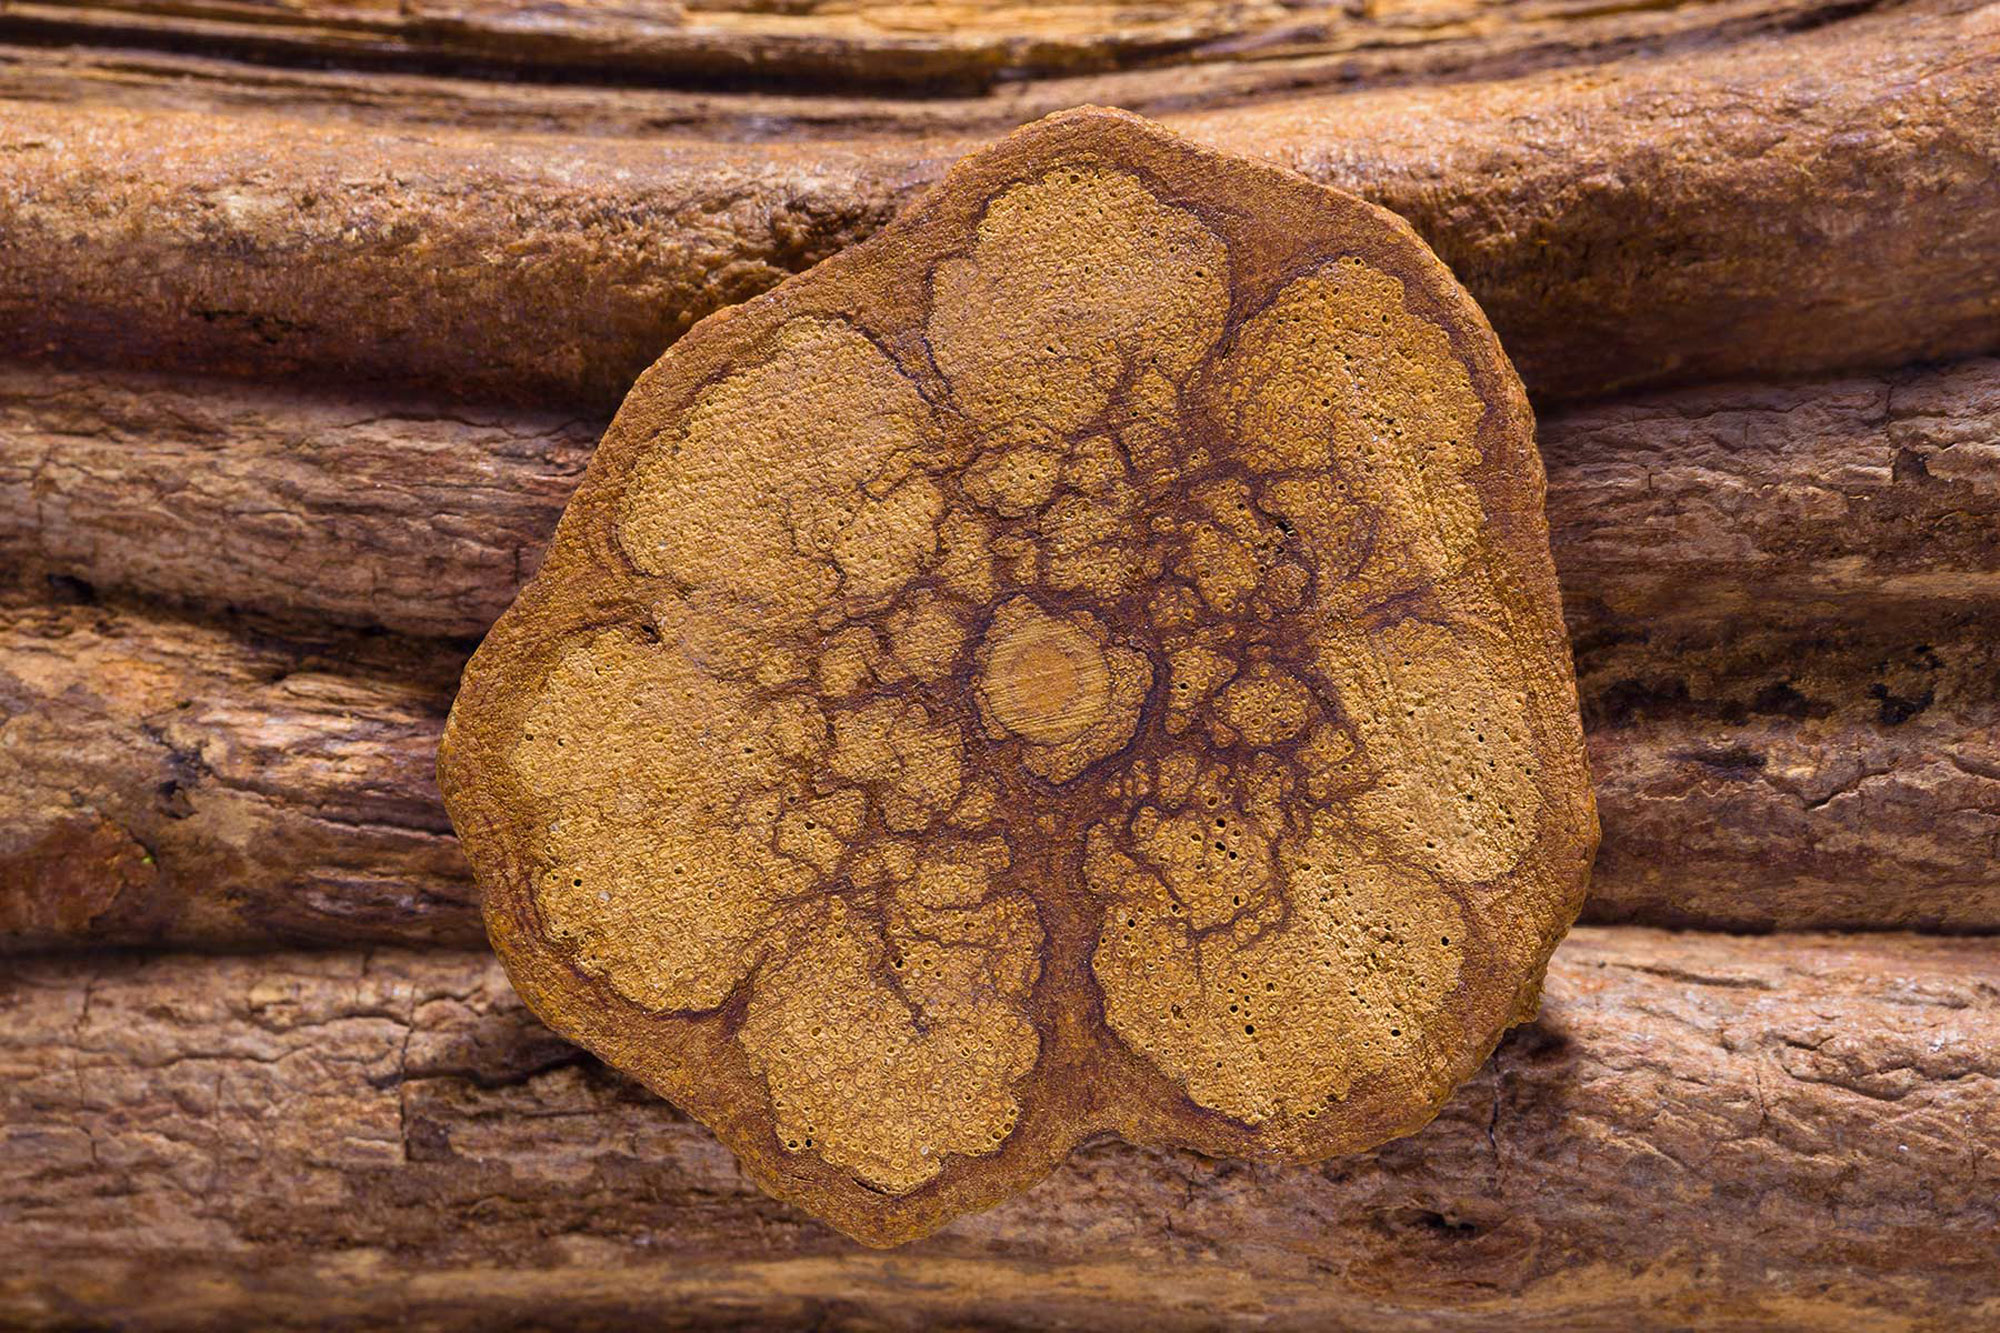 Banisteriopsis caapi (ayahuasca) wood and cross-section